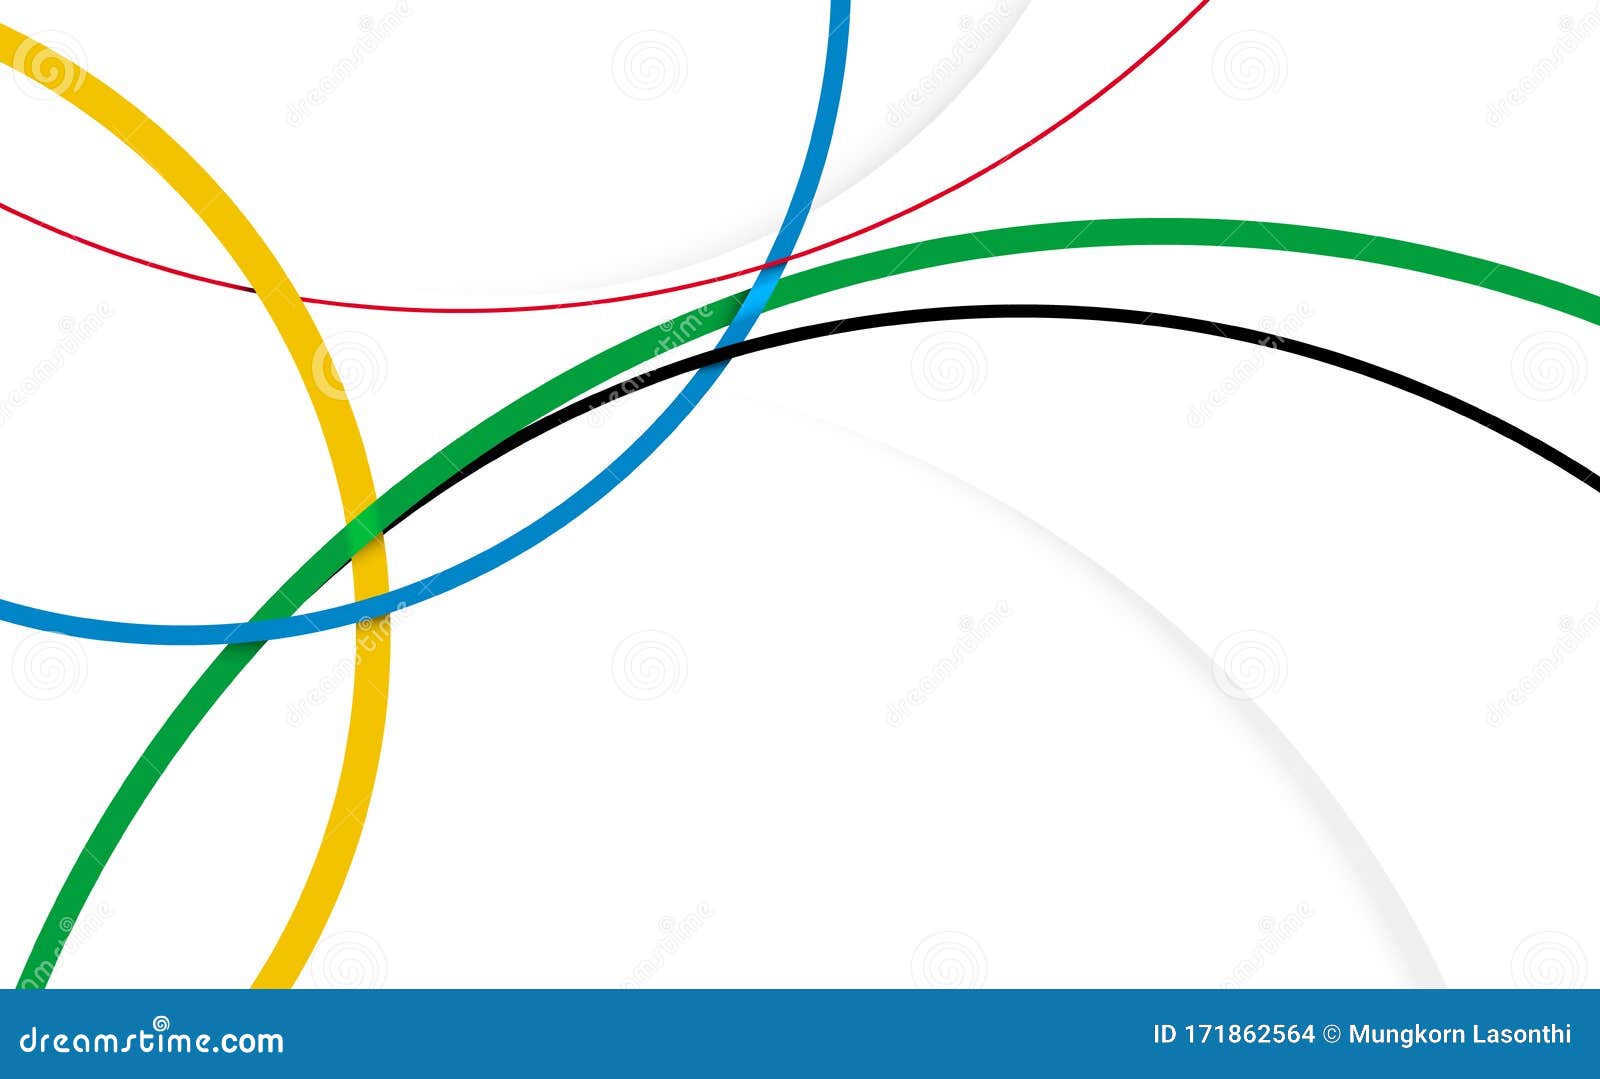 Olympic rings PNG transparent image download, size: 960x640px